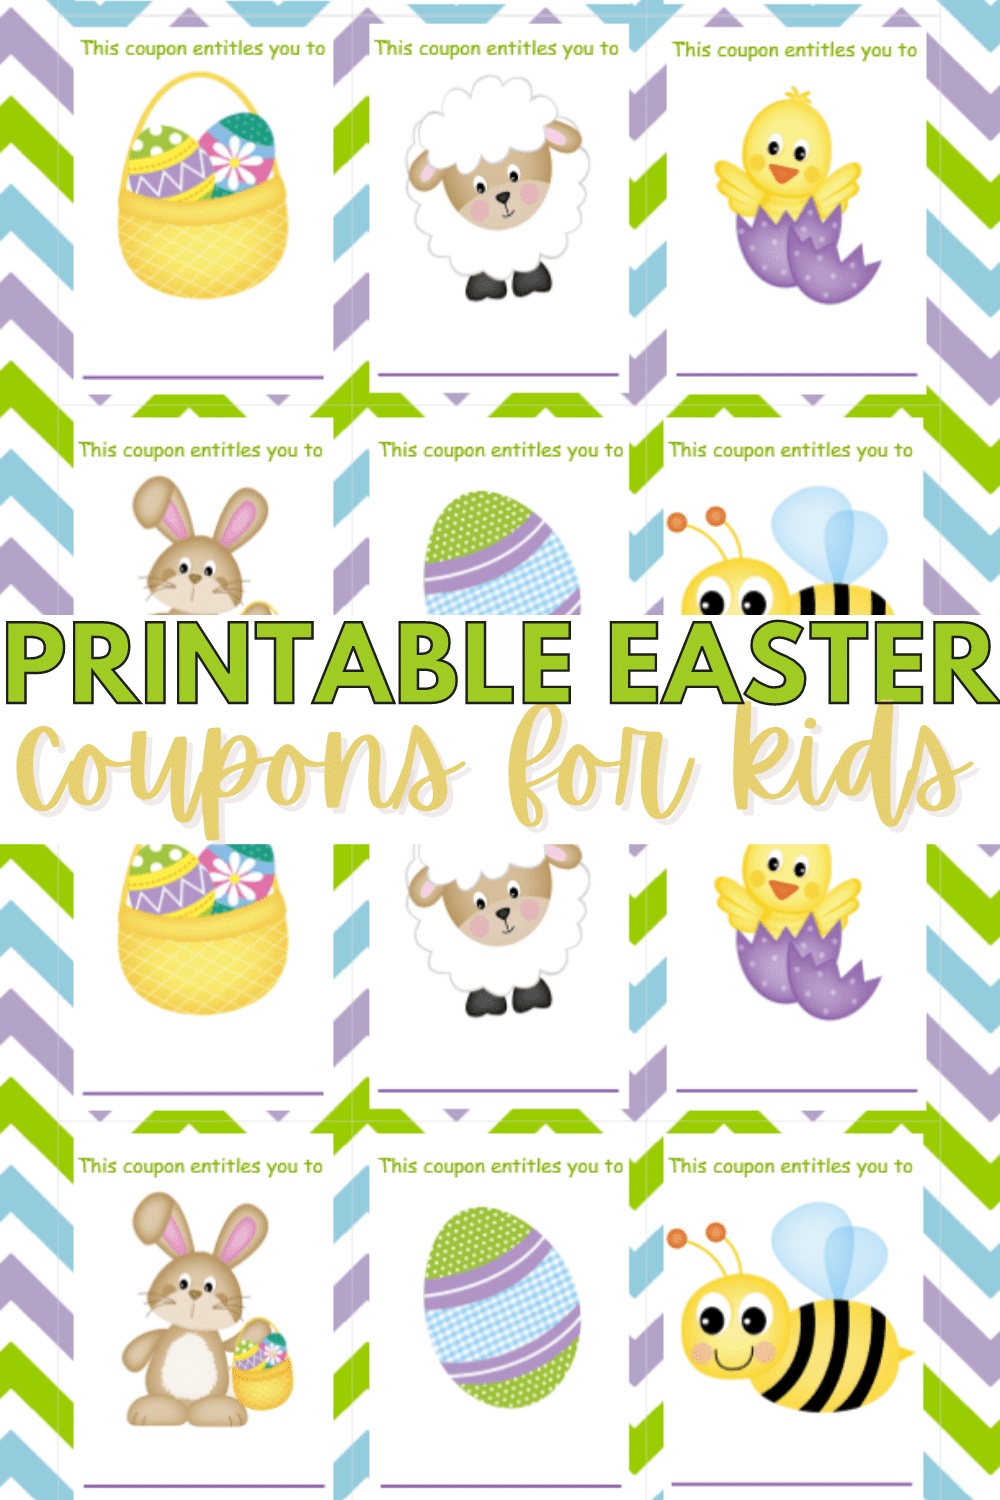 These colorful, printable Easter coupons for kids make a great, non-candy Easter basket filler that doesn't cost a dime and kids love! #printables #freeprintables #eastercoupons #coupons #kidprintables via @wondermomwannab